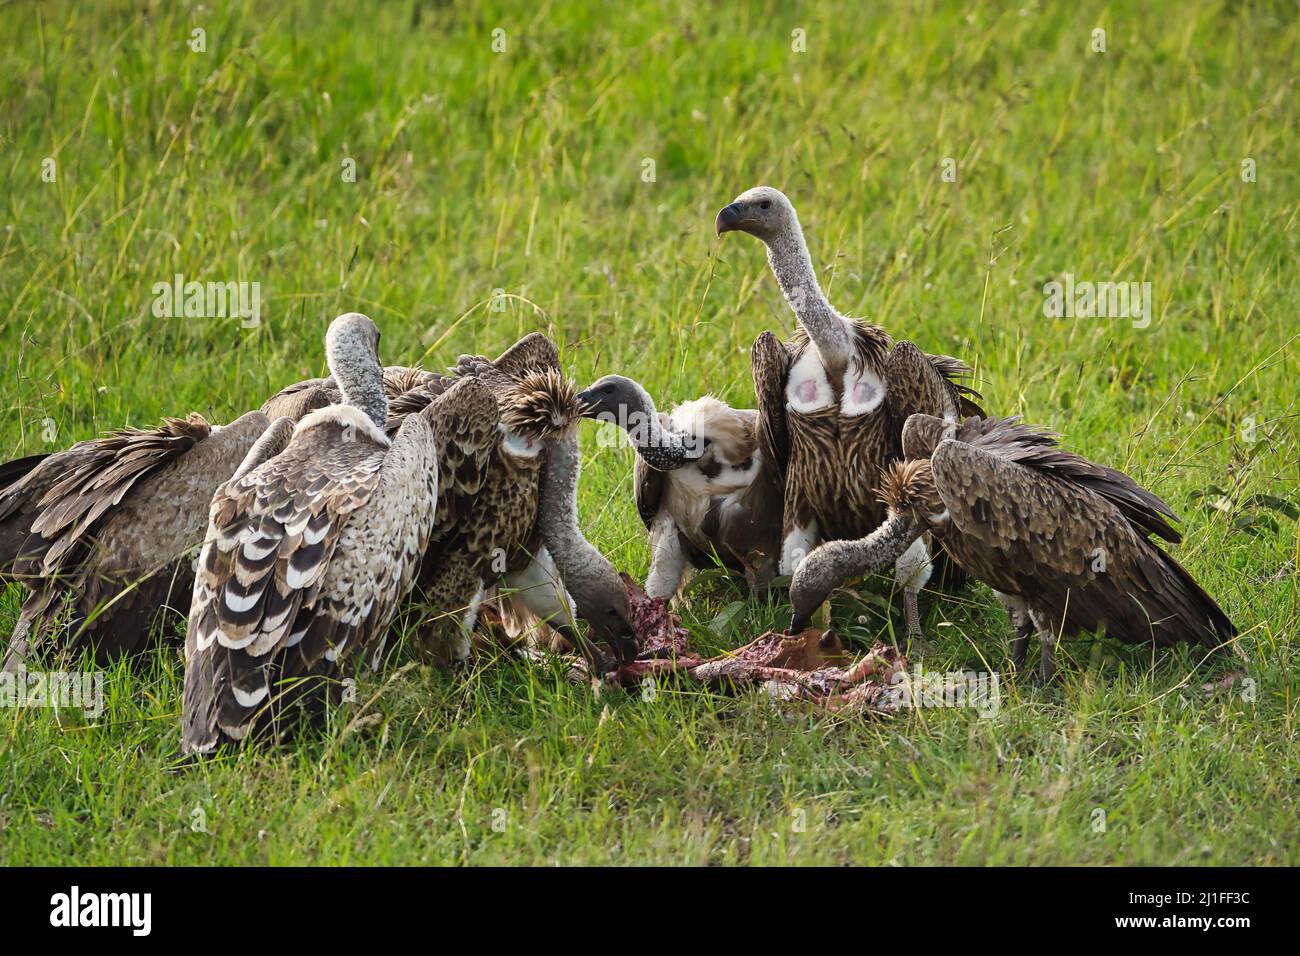 A group of vultures eating the rest of a dead cadaver, Masai Mara National Reserve in Kenya Stock Photo